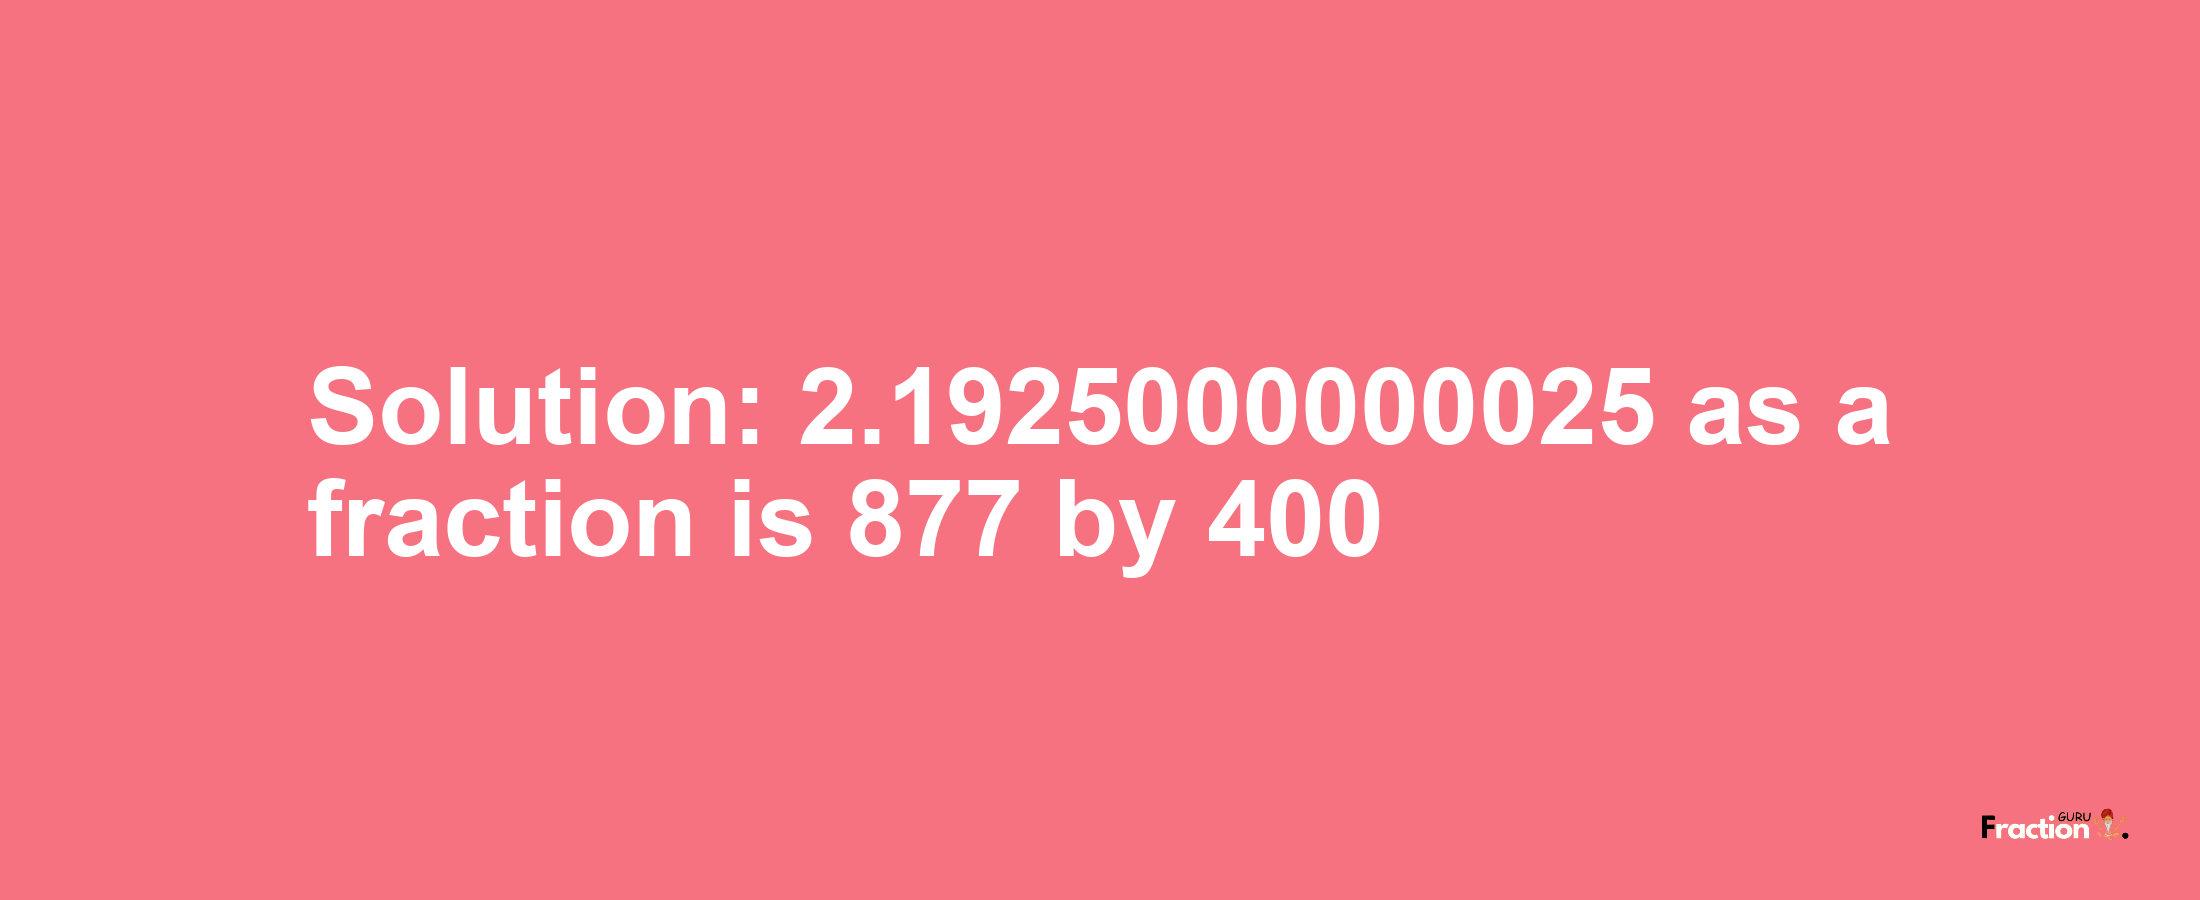 Solution:2.1925000000025 as a fraction is 877/400